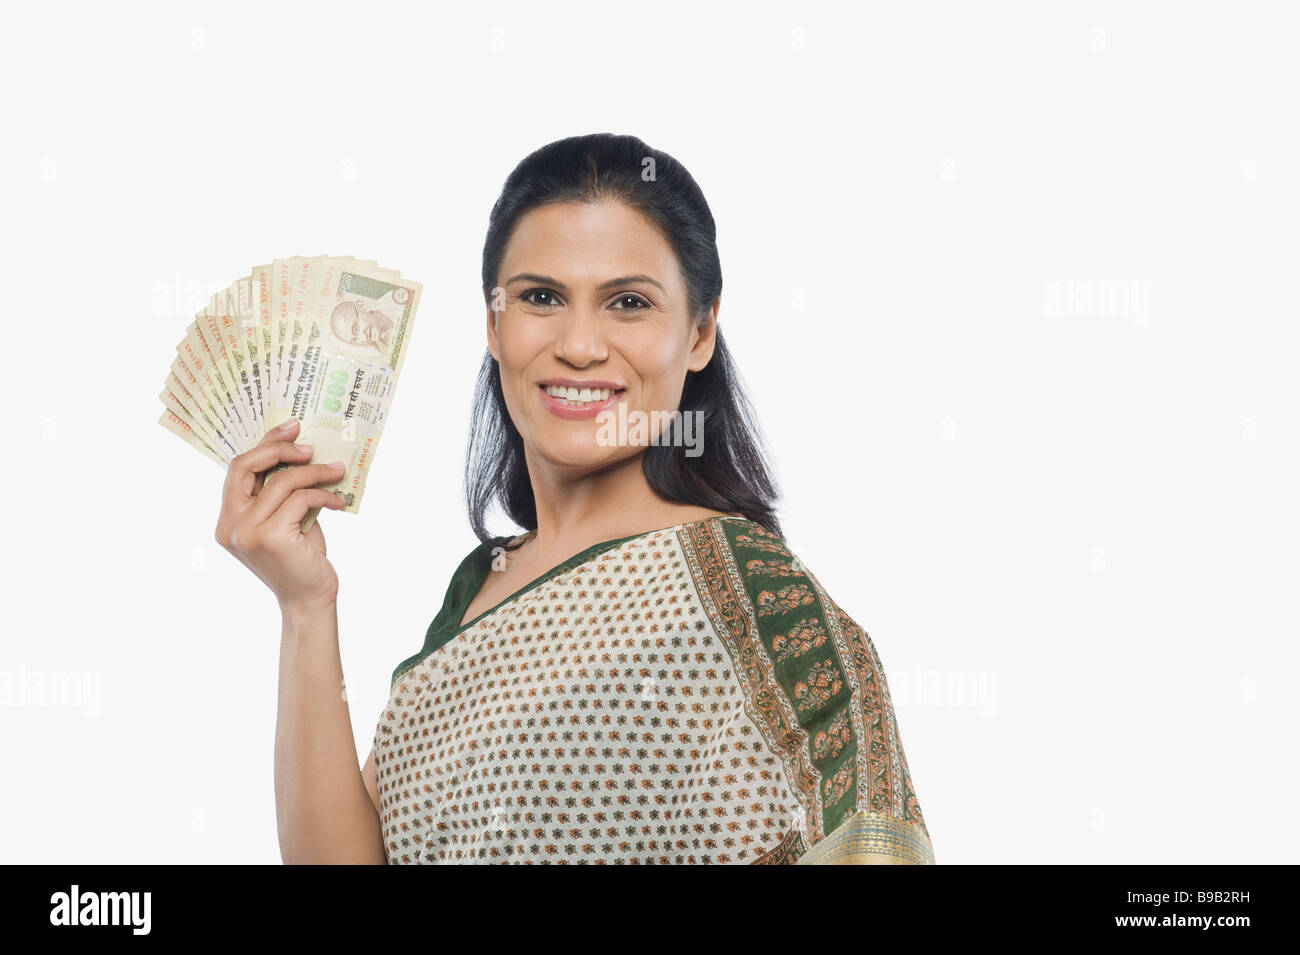 Woman holding currency notes Stock Photo